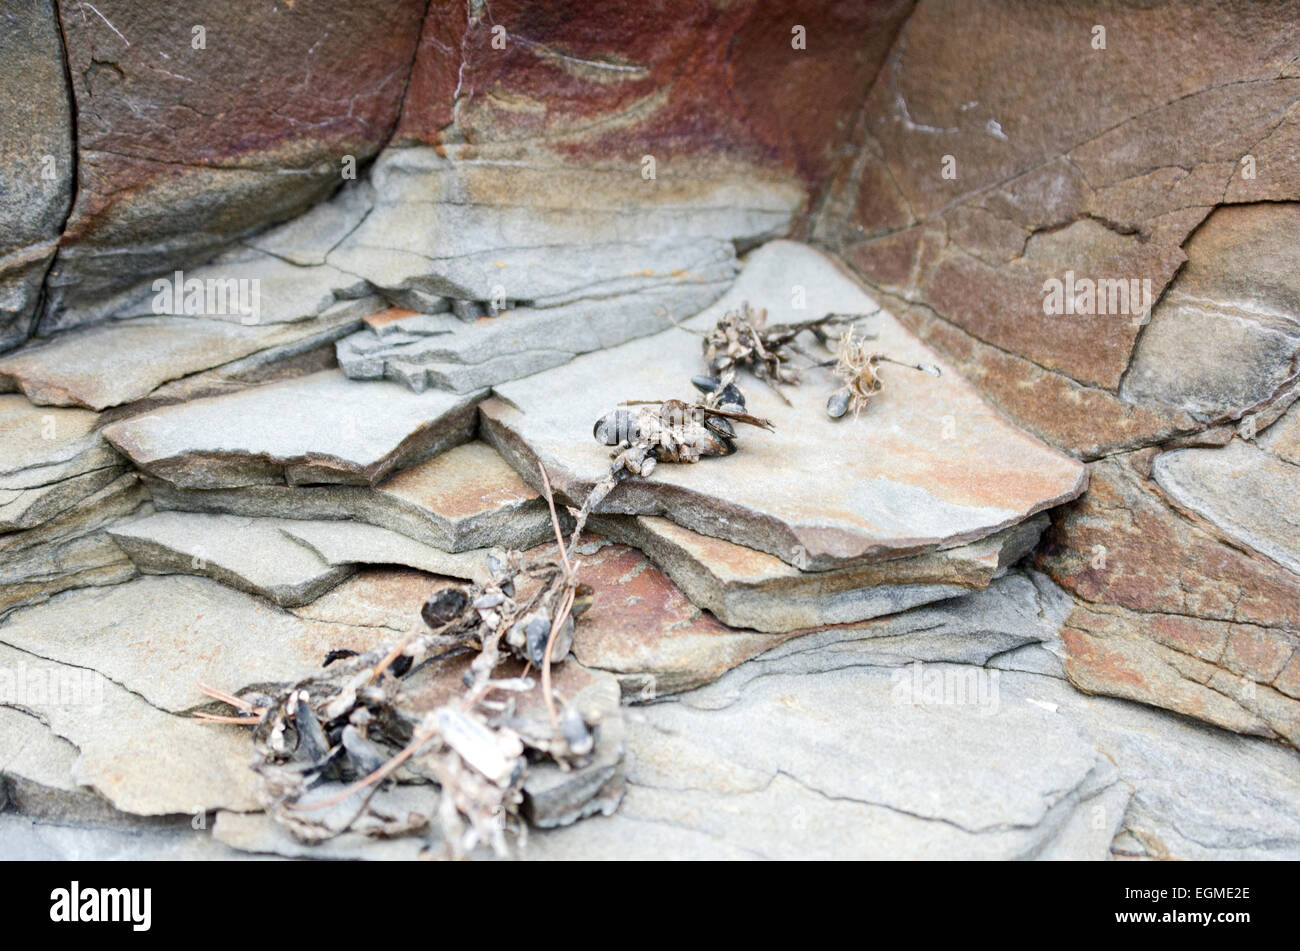 Baby mussels attached to a piece of rope are lying on an outcrop of Bar Harbor Formation sandstone. Bar Harbor, Maine. Stock Photo